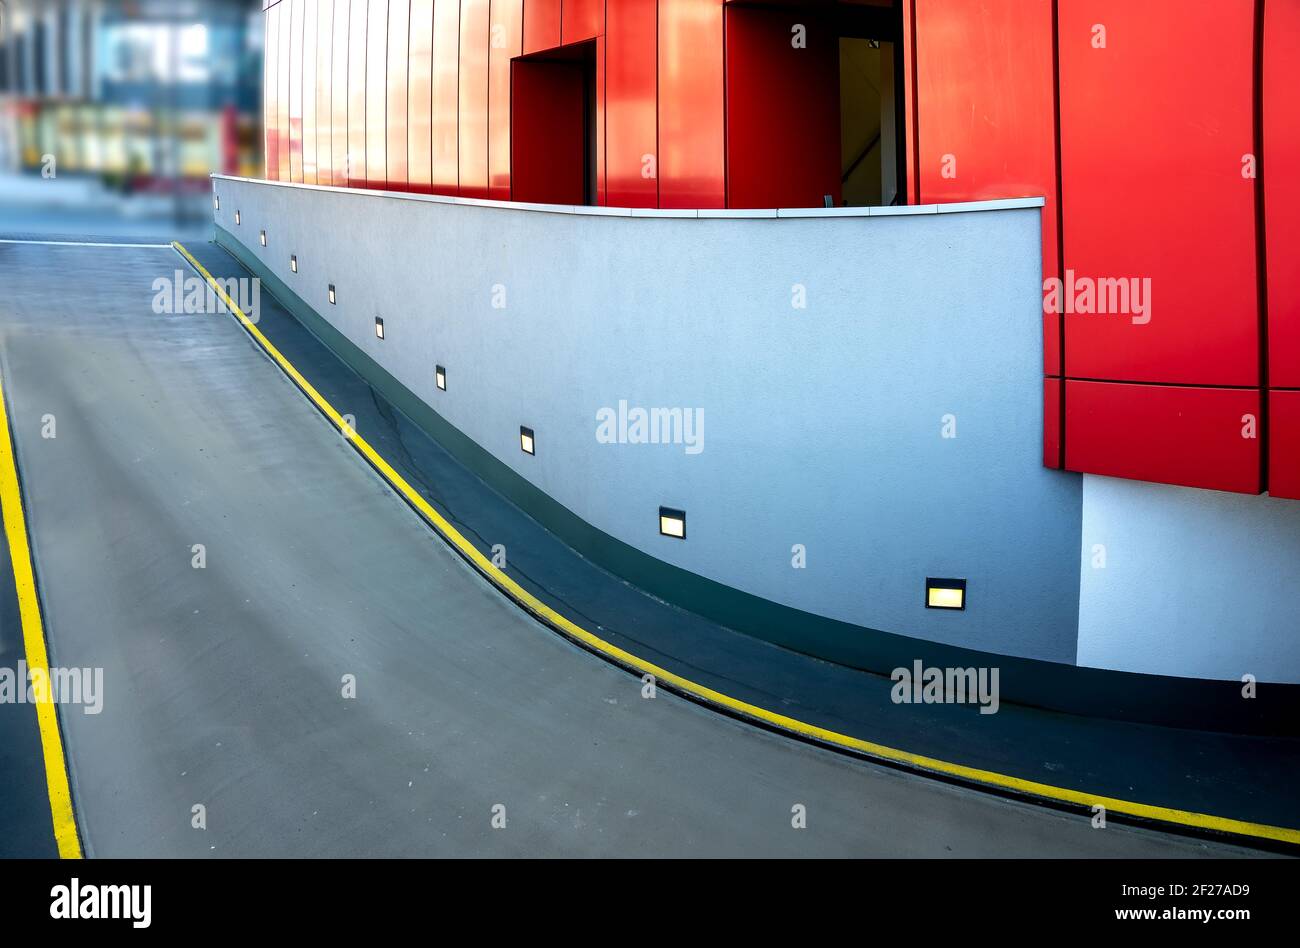 Entrance to an underground car park with modern red and grey wall cladding Stock Photo